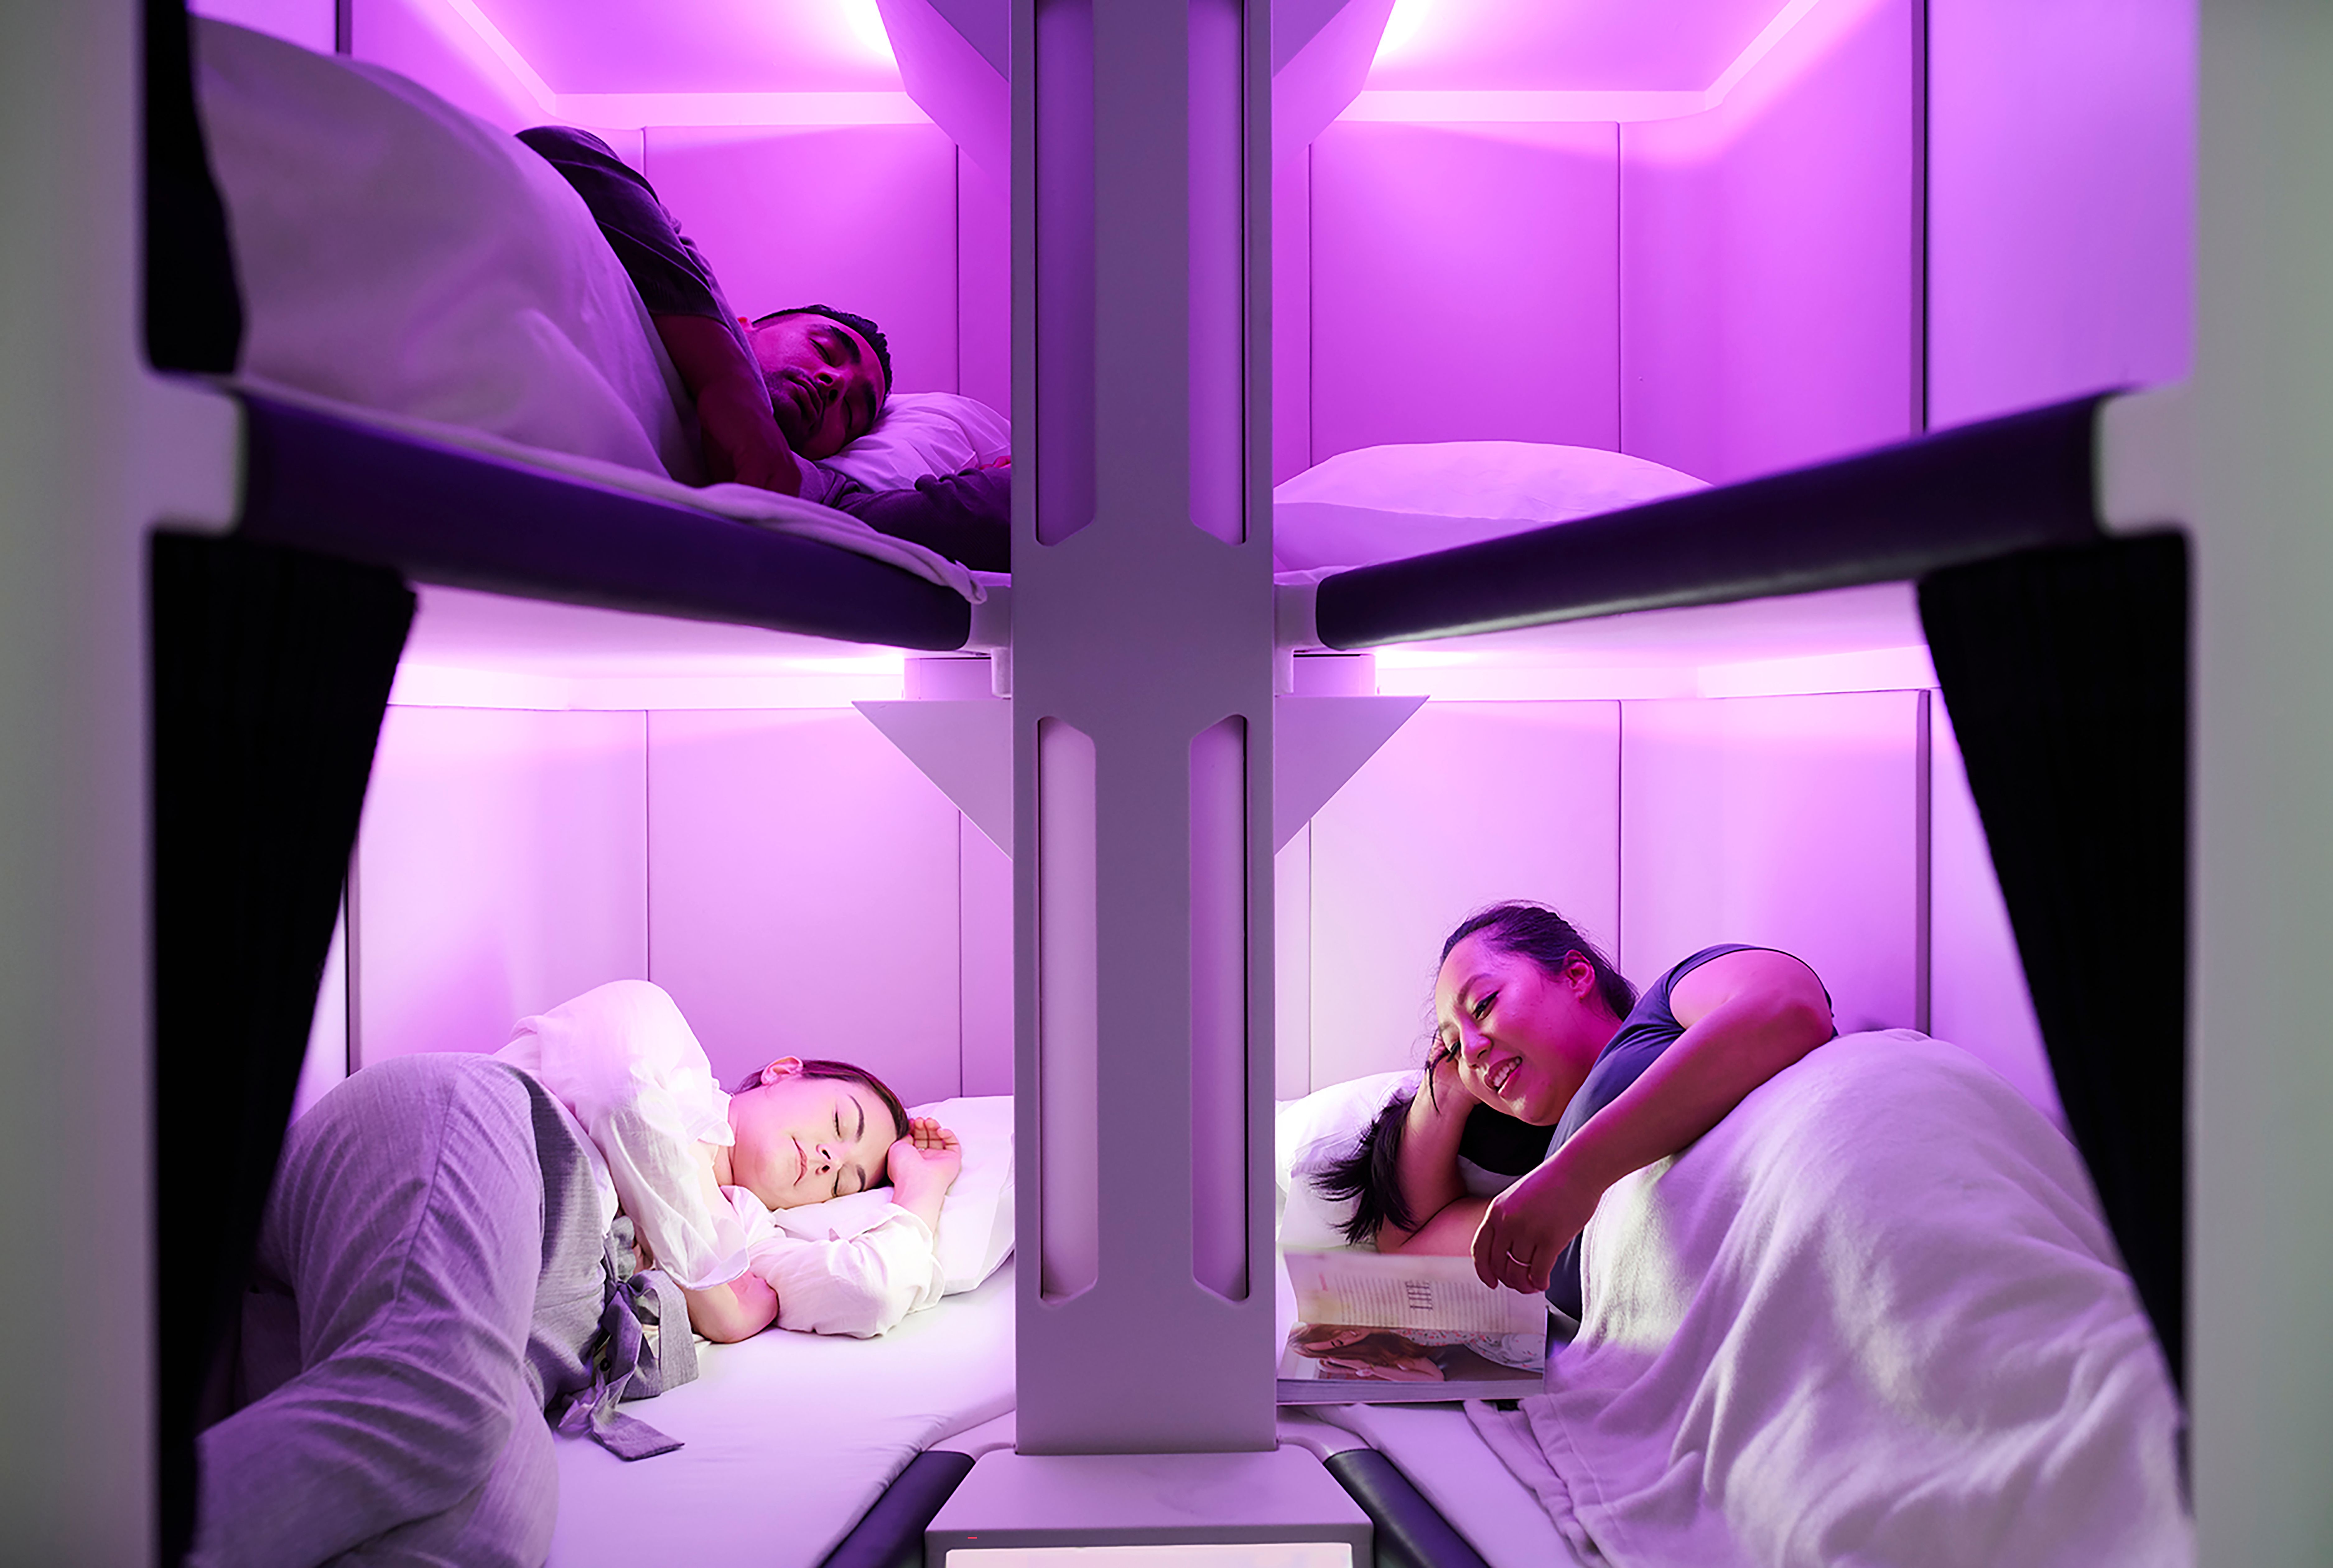 Lie-Flat Economic system? A Look At Air New Zealand’s Proposed Skynest Cabin